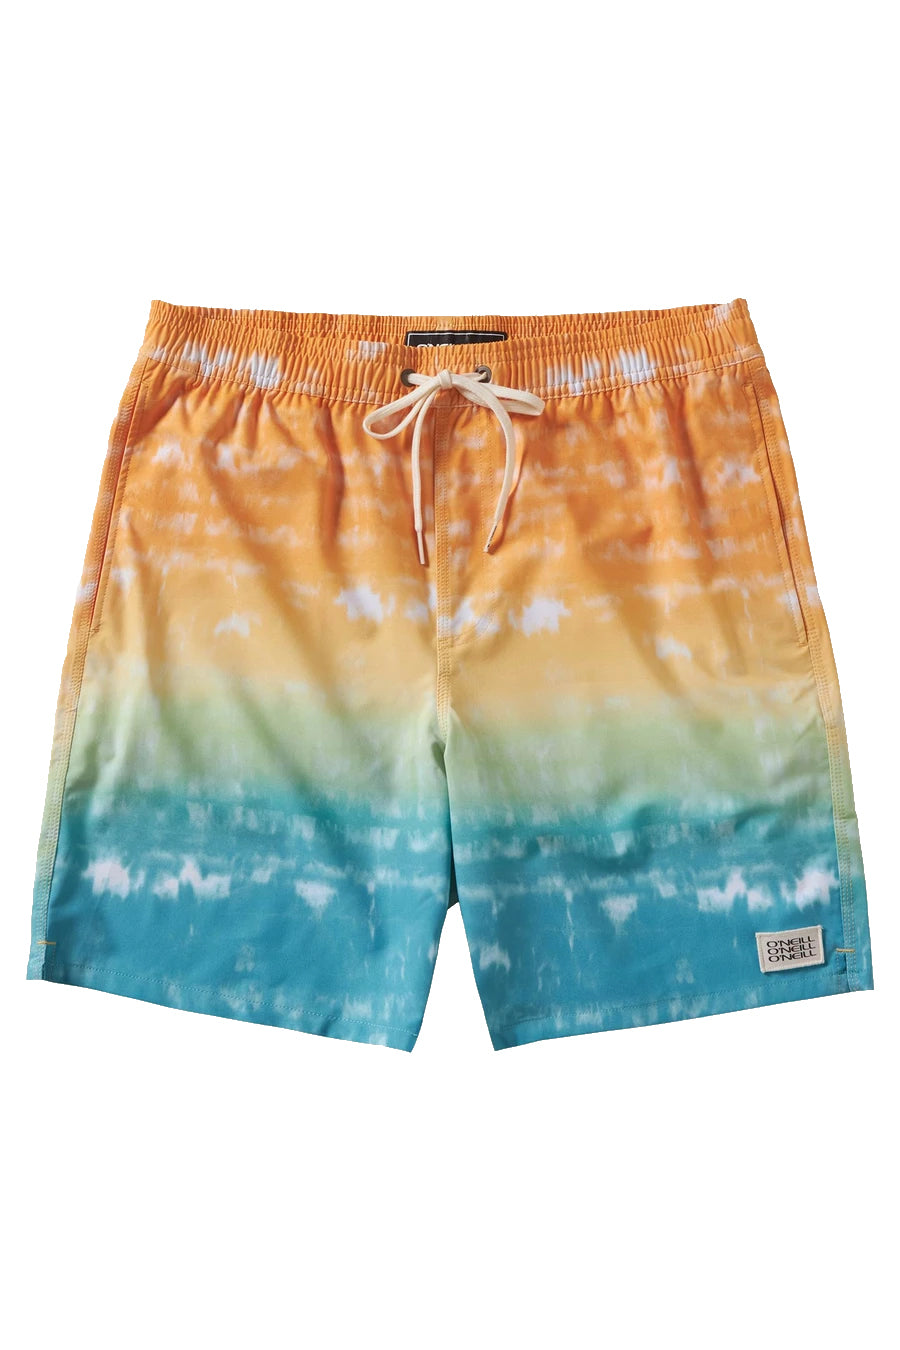 O'neill Mixed Up 17" Volley Boardshorts MUL-Multi L